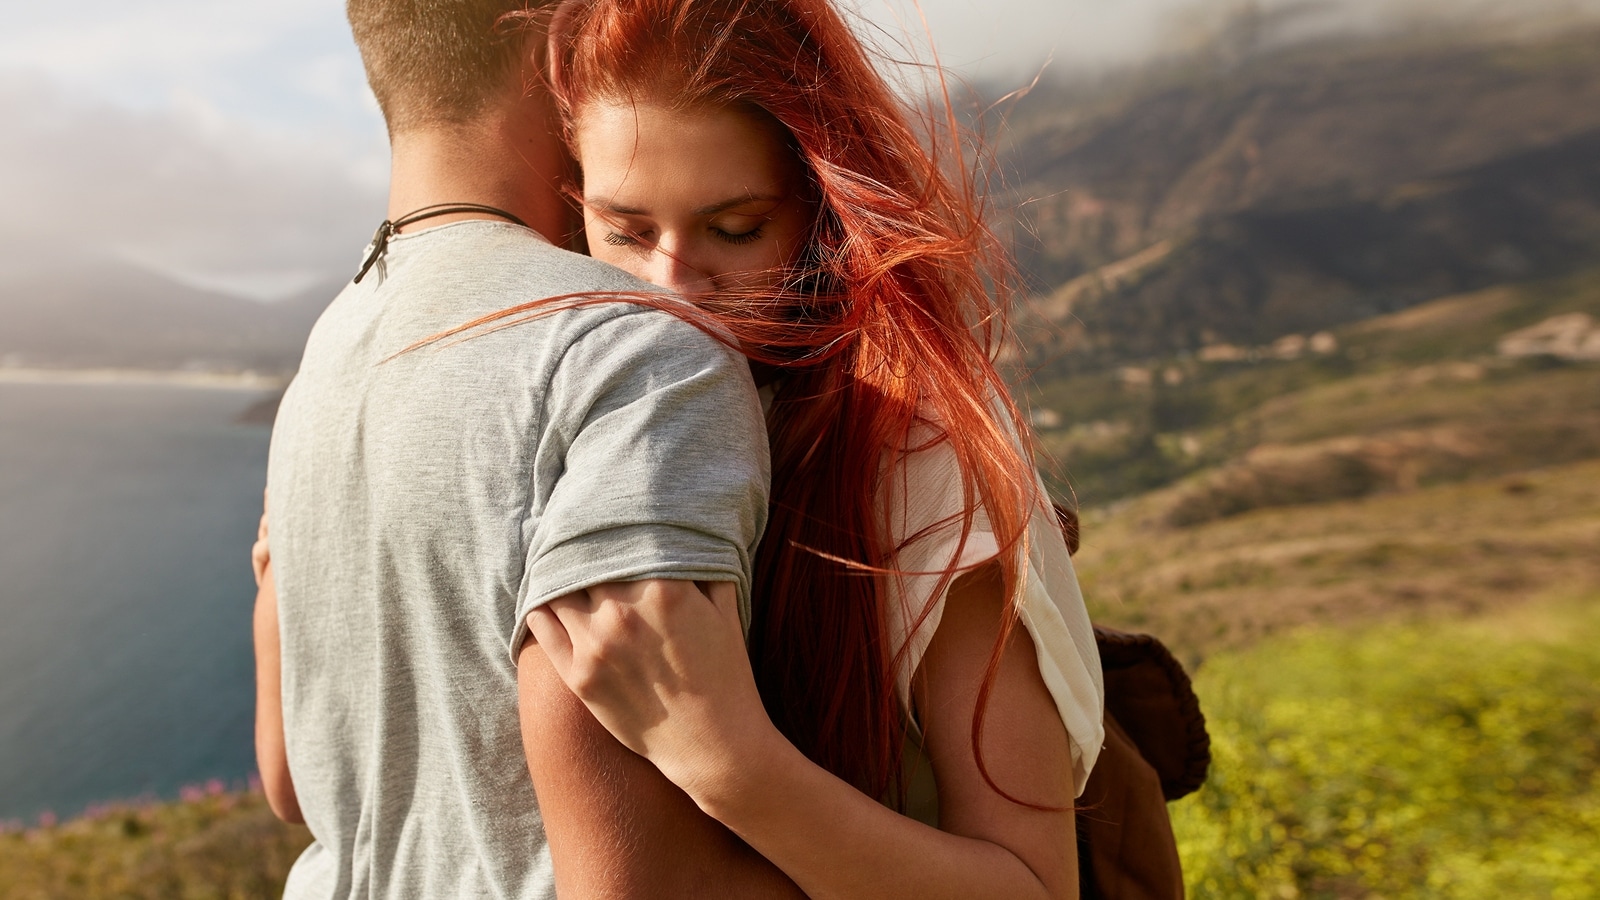 Close up shot of young woman hugging her boyfriend. Young couple in love embracing outdoors.